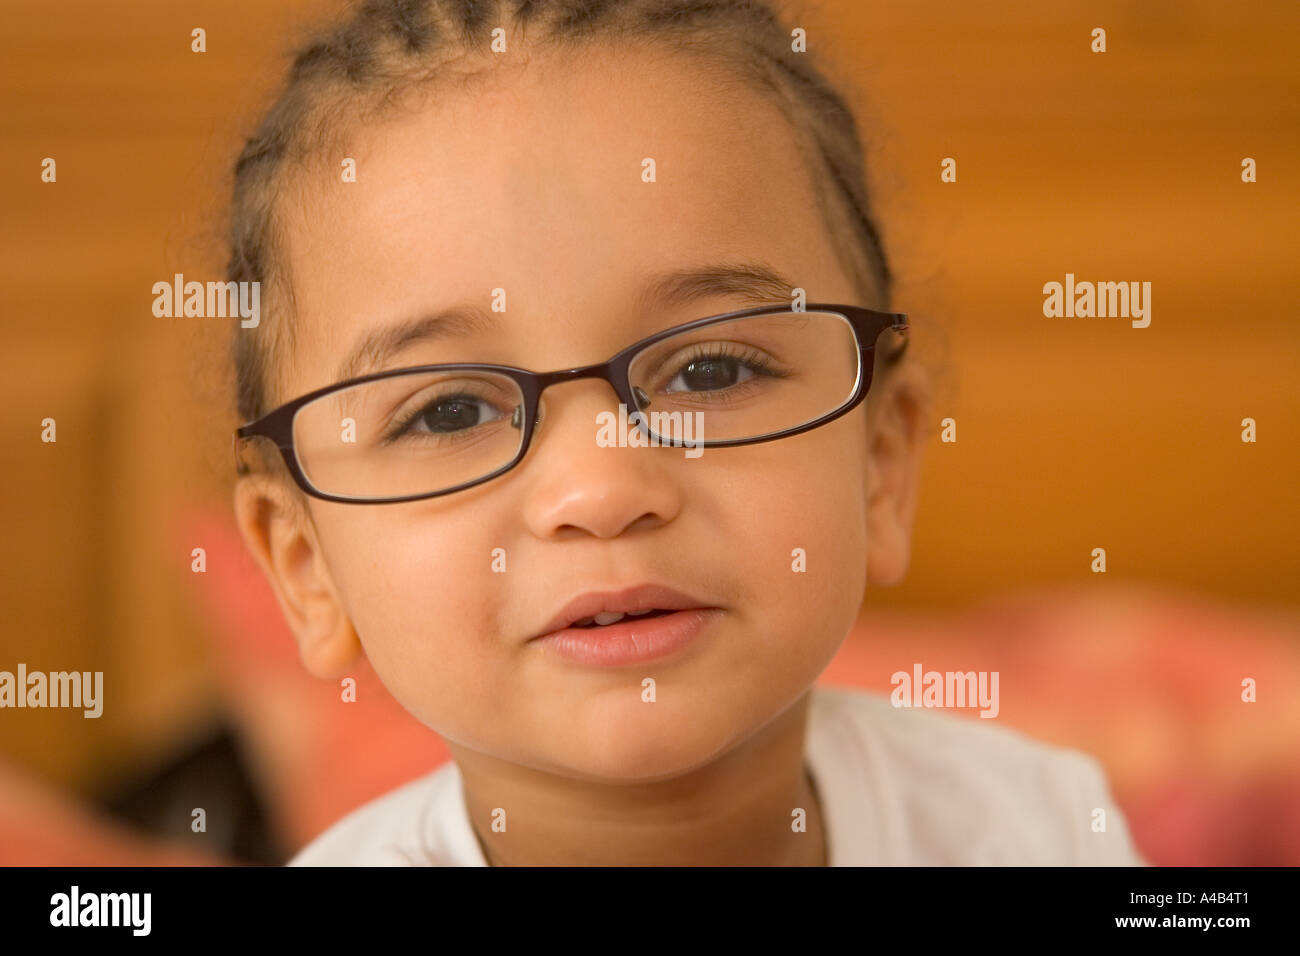 A beautiful young mixed race girl wearing slightly oversized glasses Stock Photo